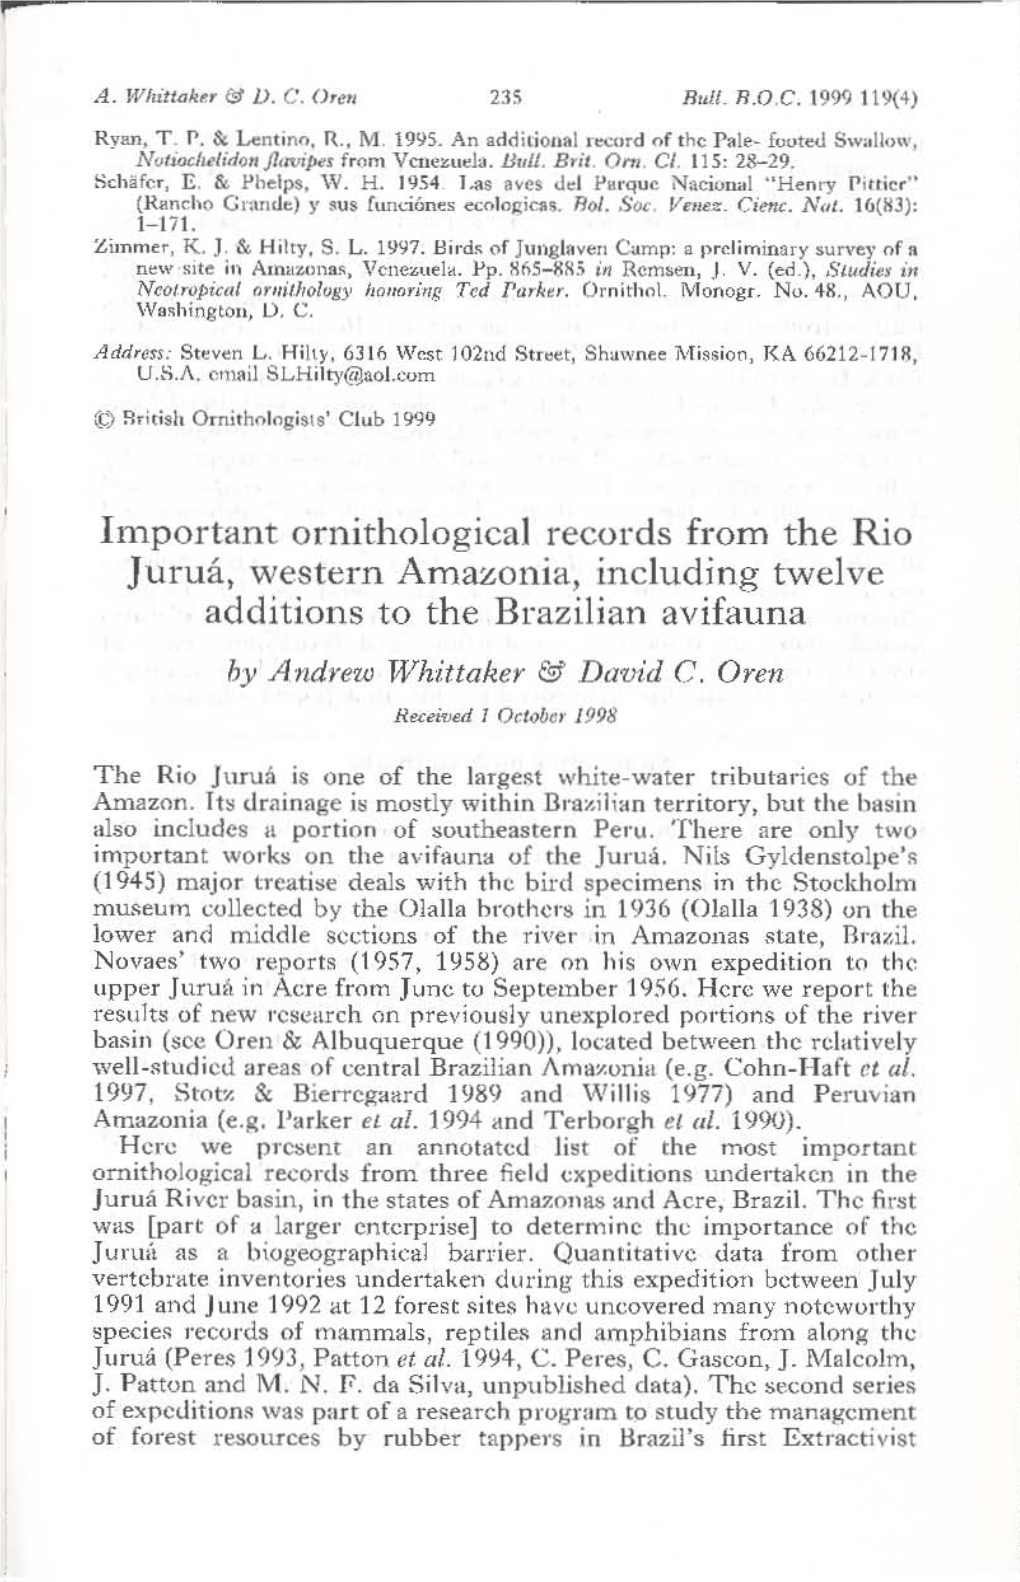 Important Ornithological Record S from the Rio Juruá, Western Amazonia, Including Twelve Additions to the Brazijian Avifauna